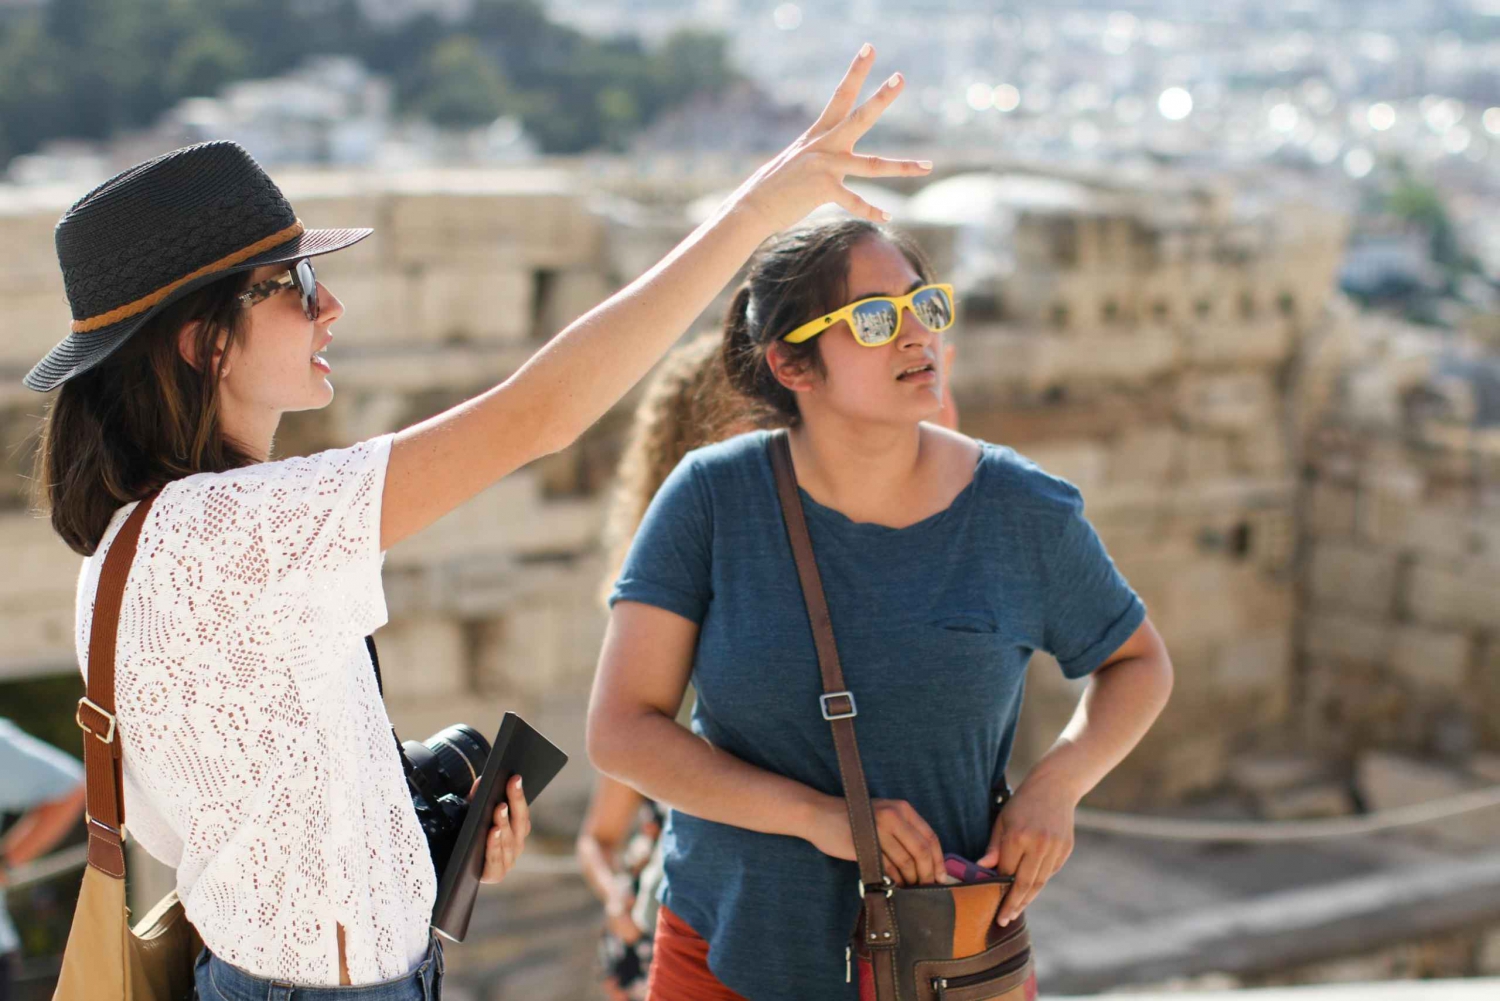 Acropolis Small Group Guided Tour with Entrance Tickets